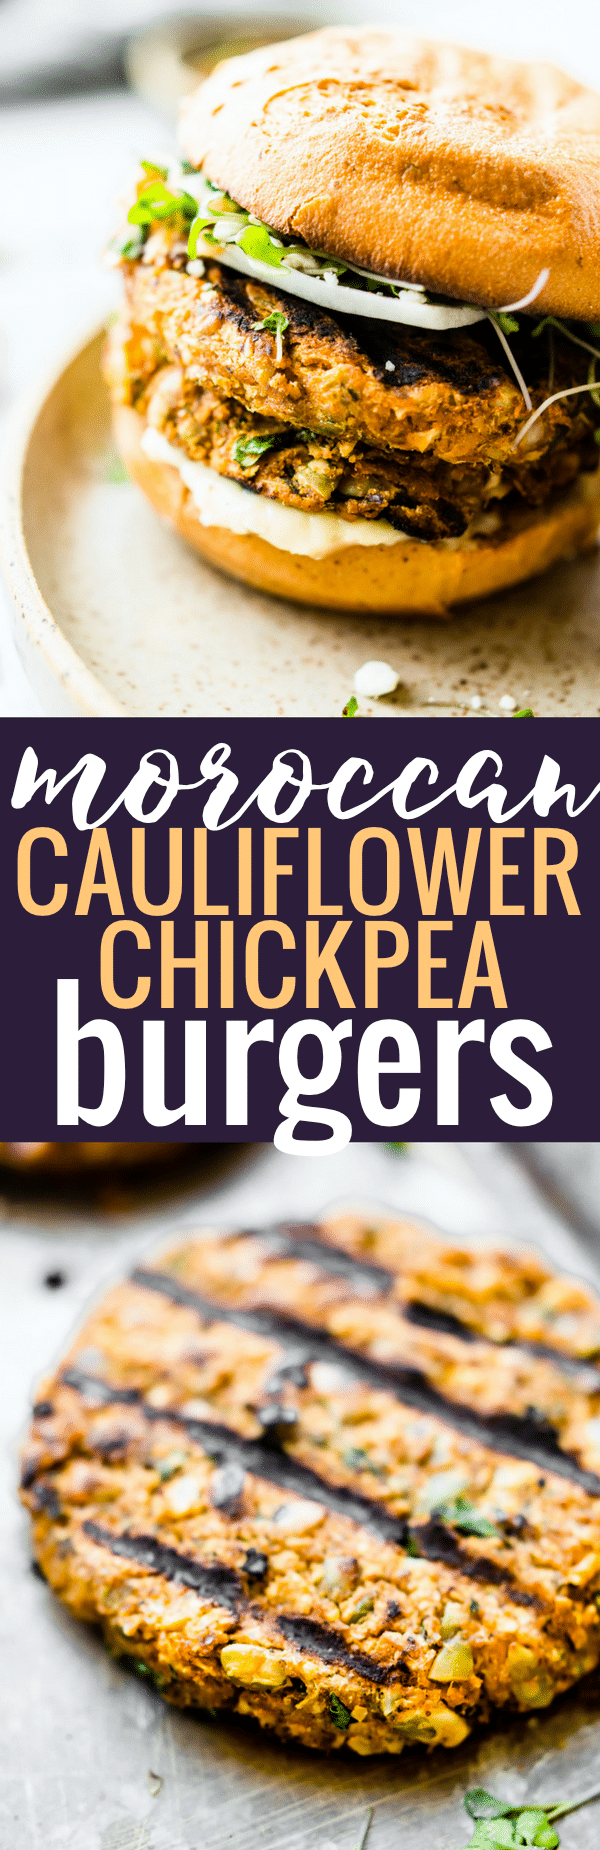 GRILLED MOROCCAN CAULIFLOWER CHICKPEA BURGERS! Flavorful veggie-packed chickpea burgers made with plant based ingredients and served on gluten free hamburger buns! This is one killer gluten free veggie burger recipe you can make on the grill or in the oven! www.cottercrunch.com